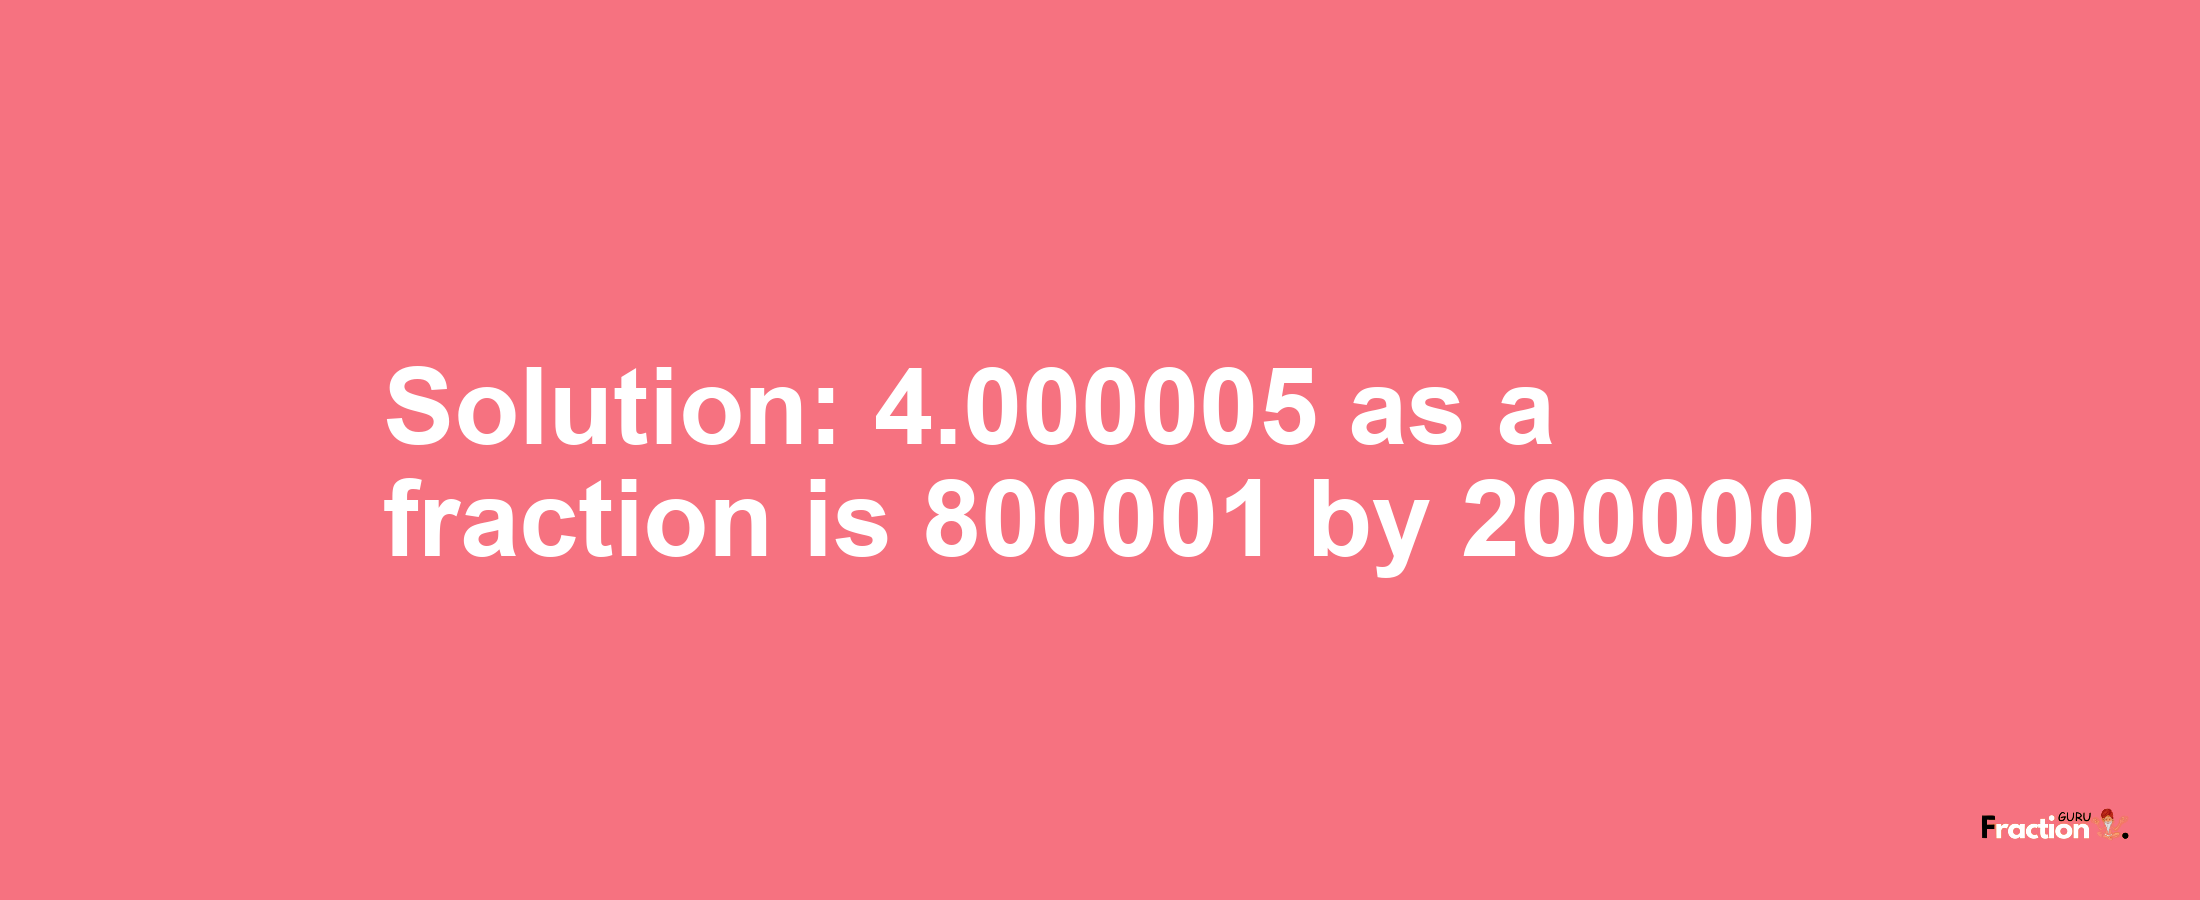 Solution:4.000005 as a fraction is 800001/200000